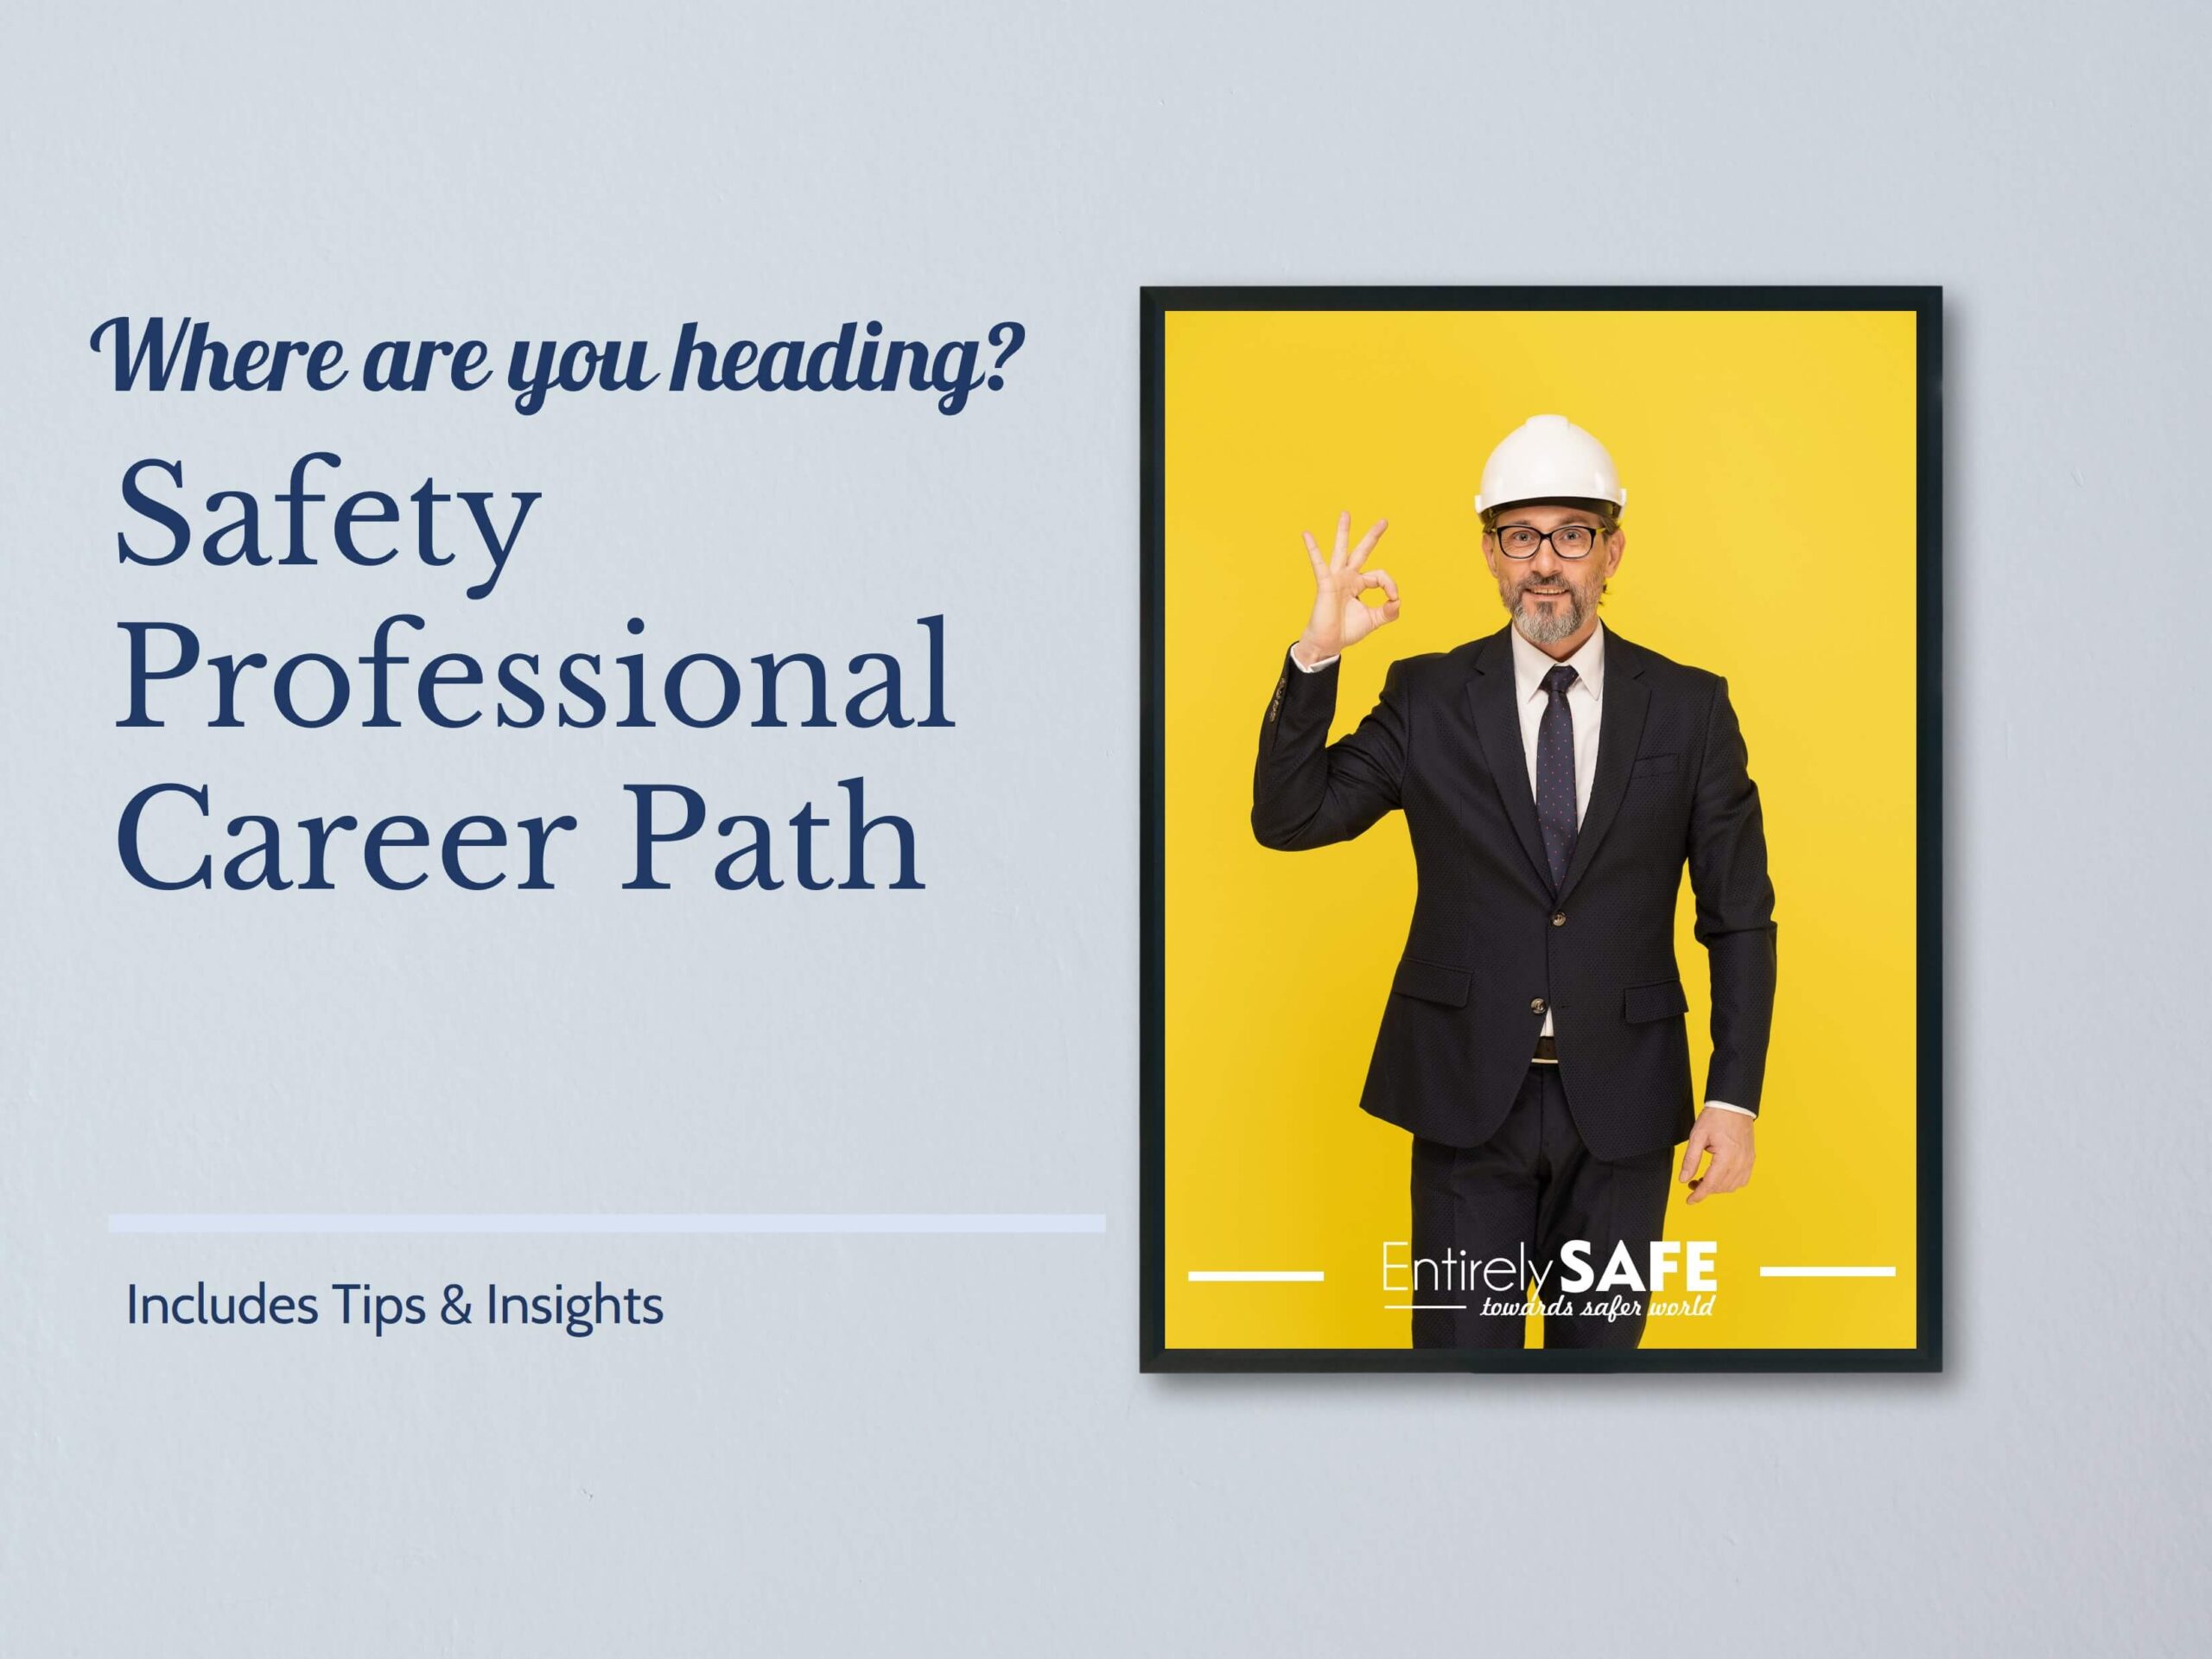 Where are you heading, Safety Professional Career Path (Tips and Insights) (1)